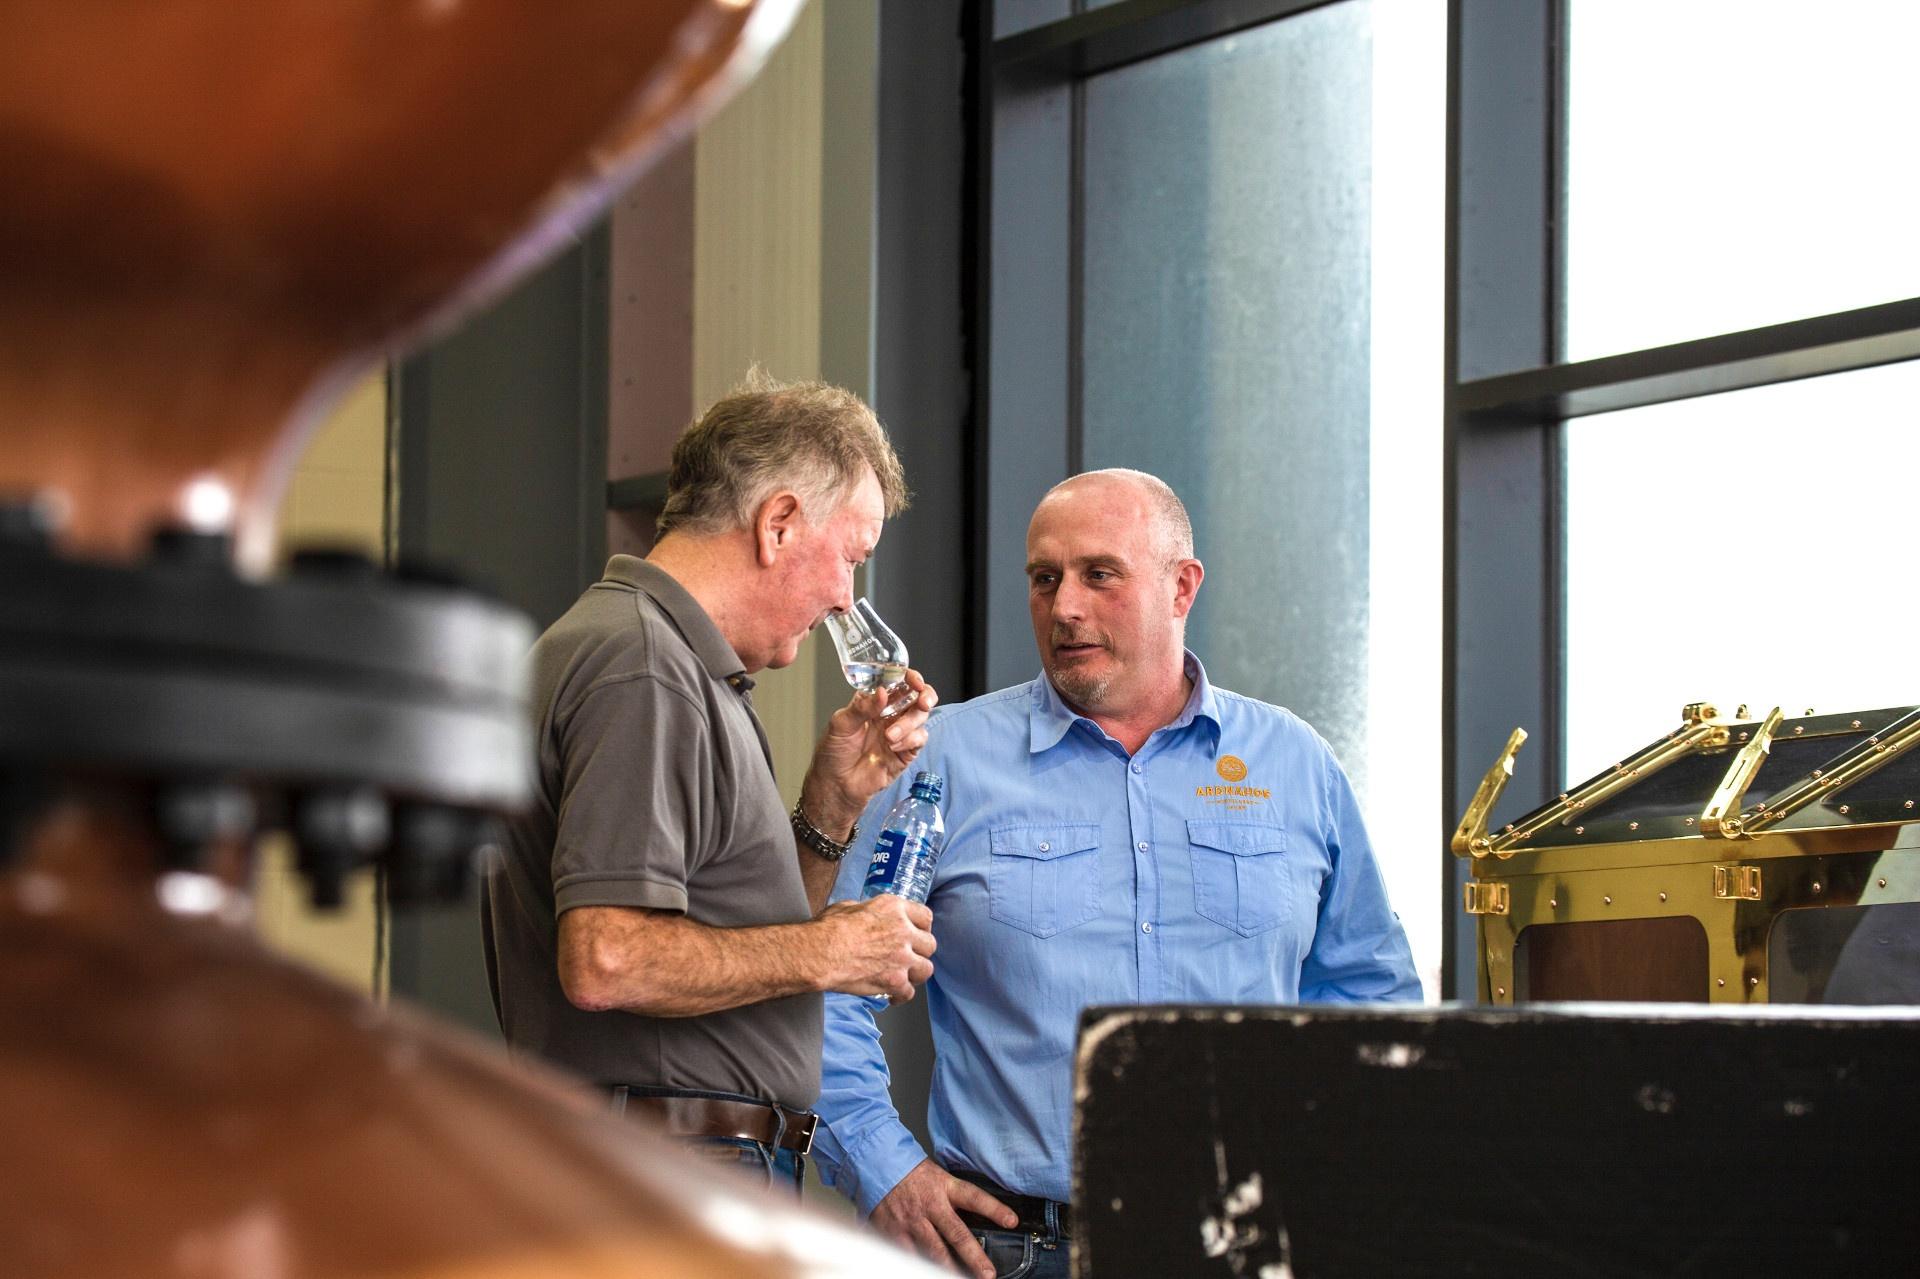 Jim McEwan noses Ardnahoe's "new make," the core spirit used to make whisky.